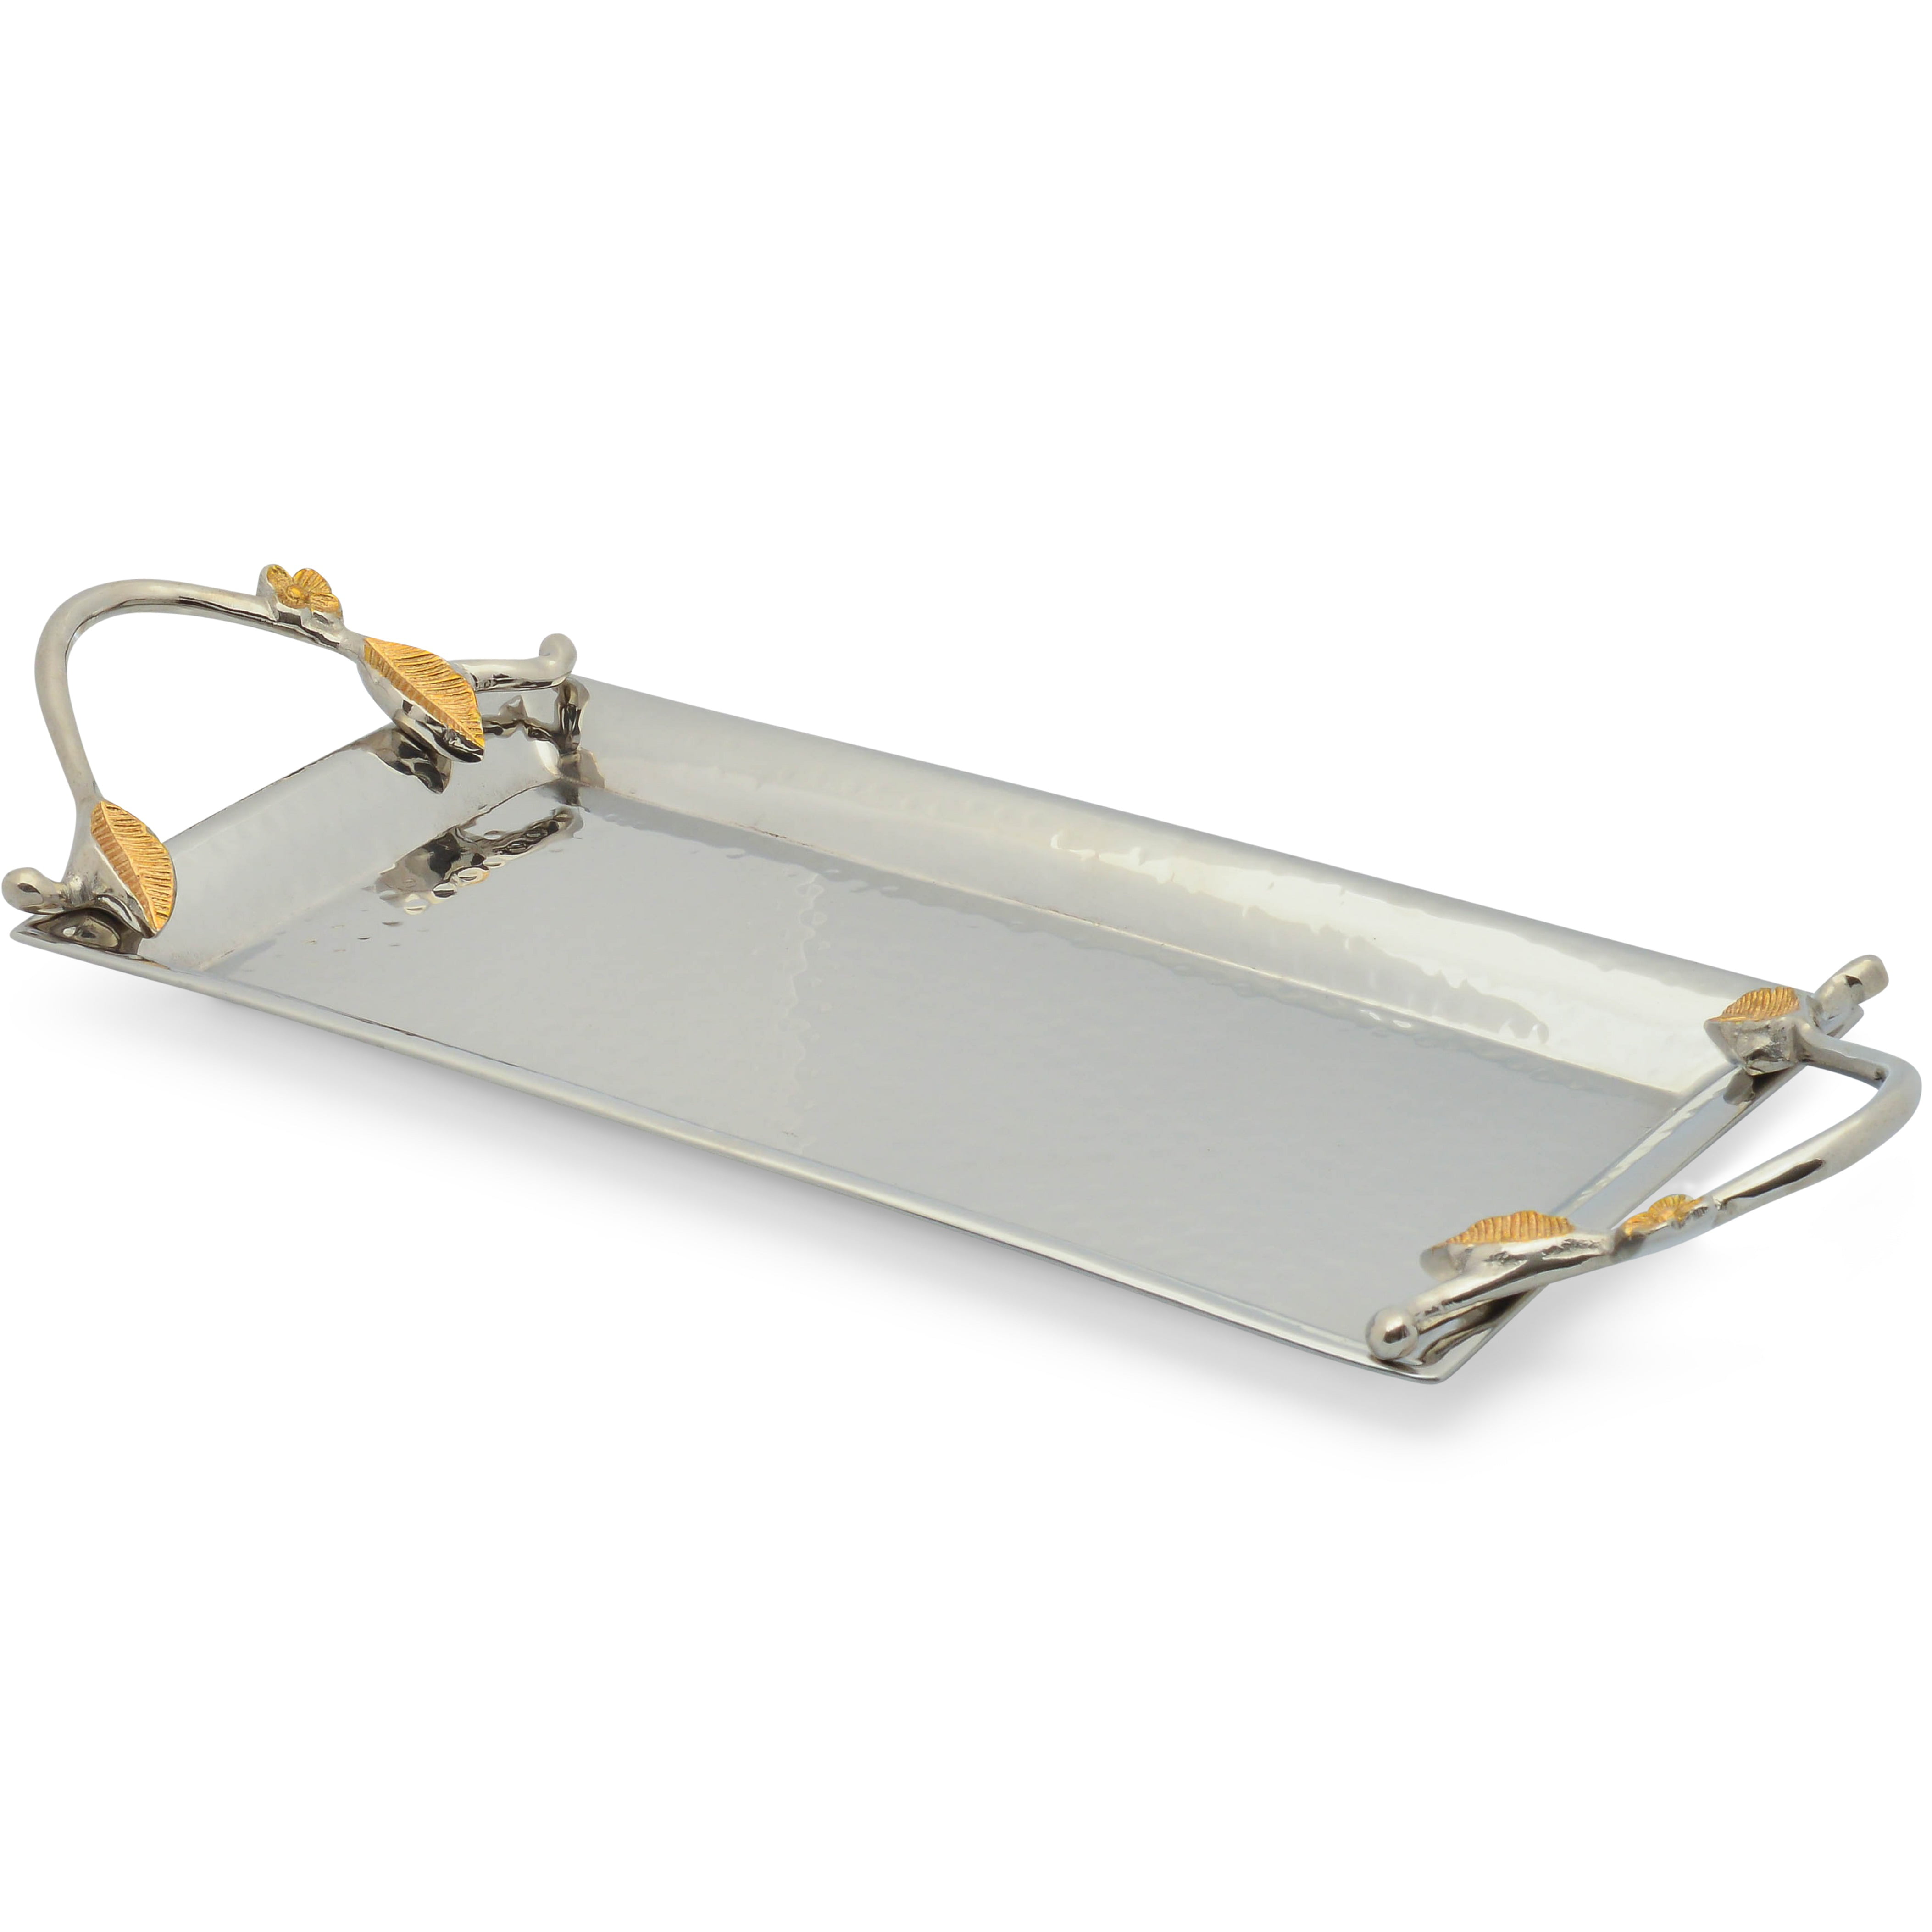 2 Elegant Rectangular Silver & Gold Stainless Steel serving tray with handles 